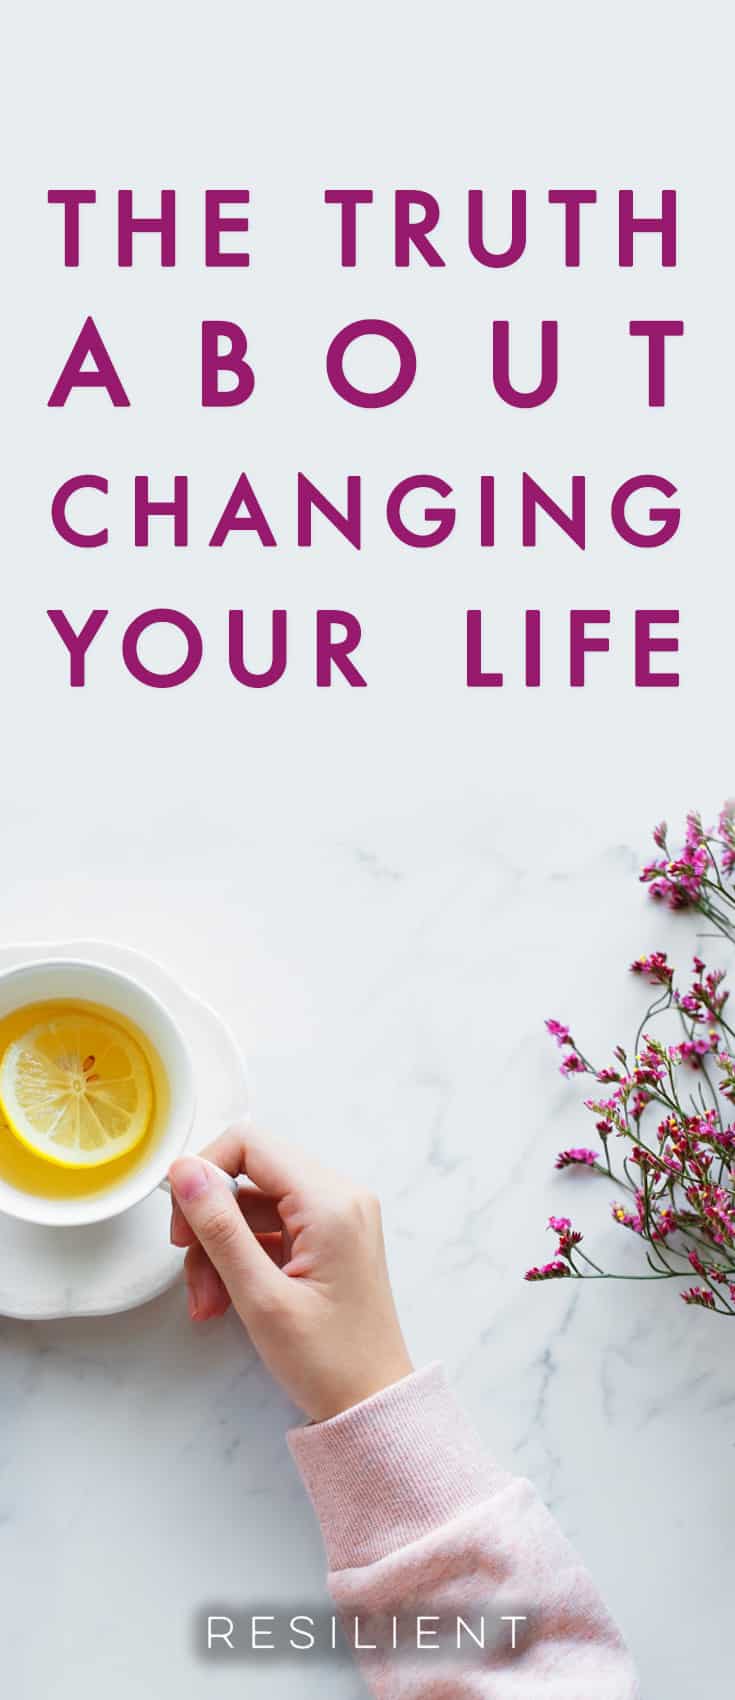 The Truth About Changing Your Life